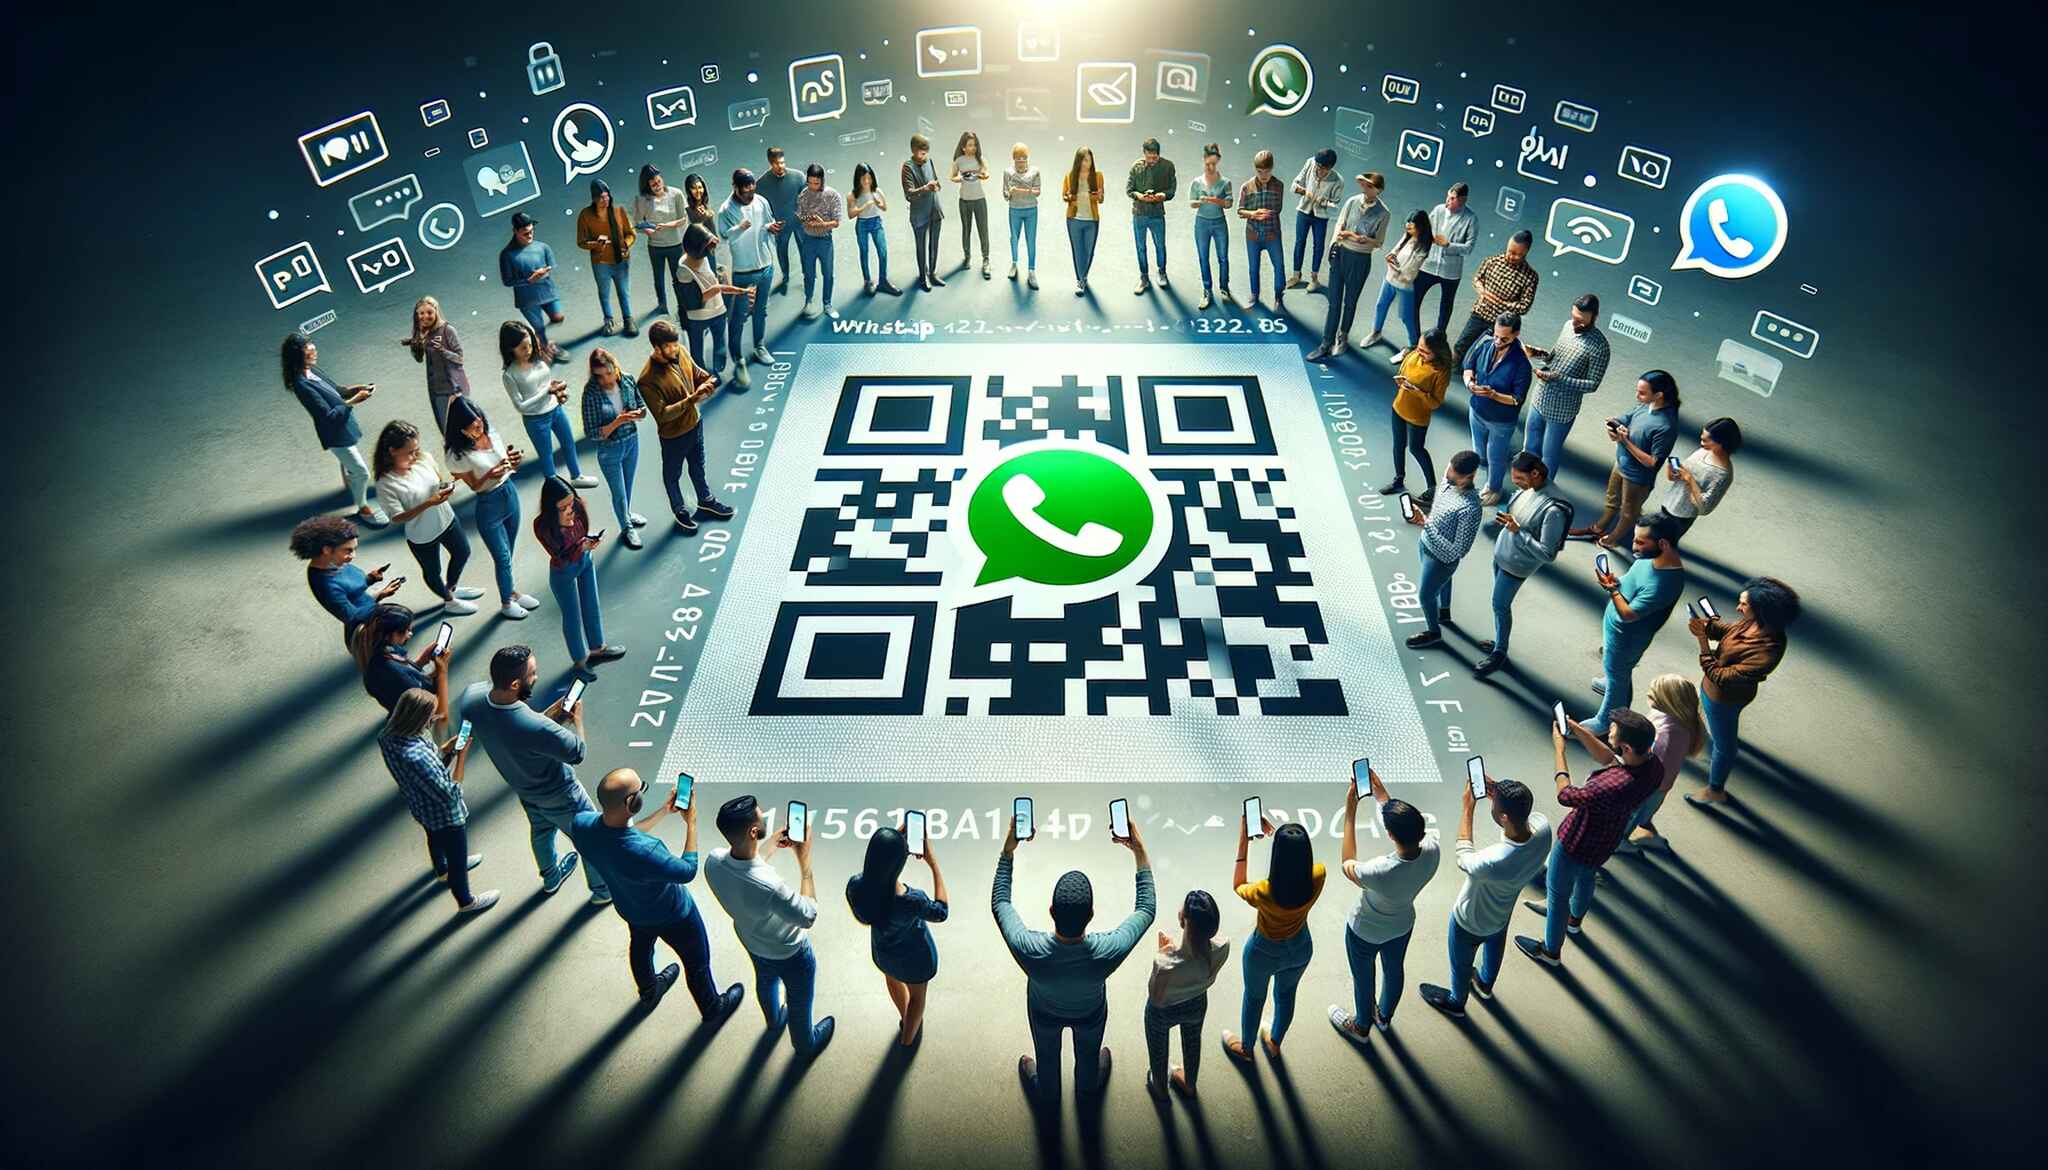 A group of people around a large WhatsApp QR code